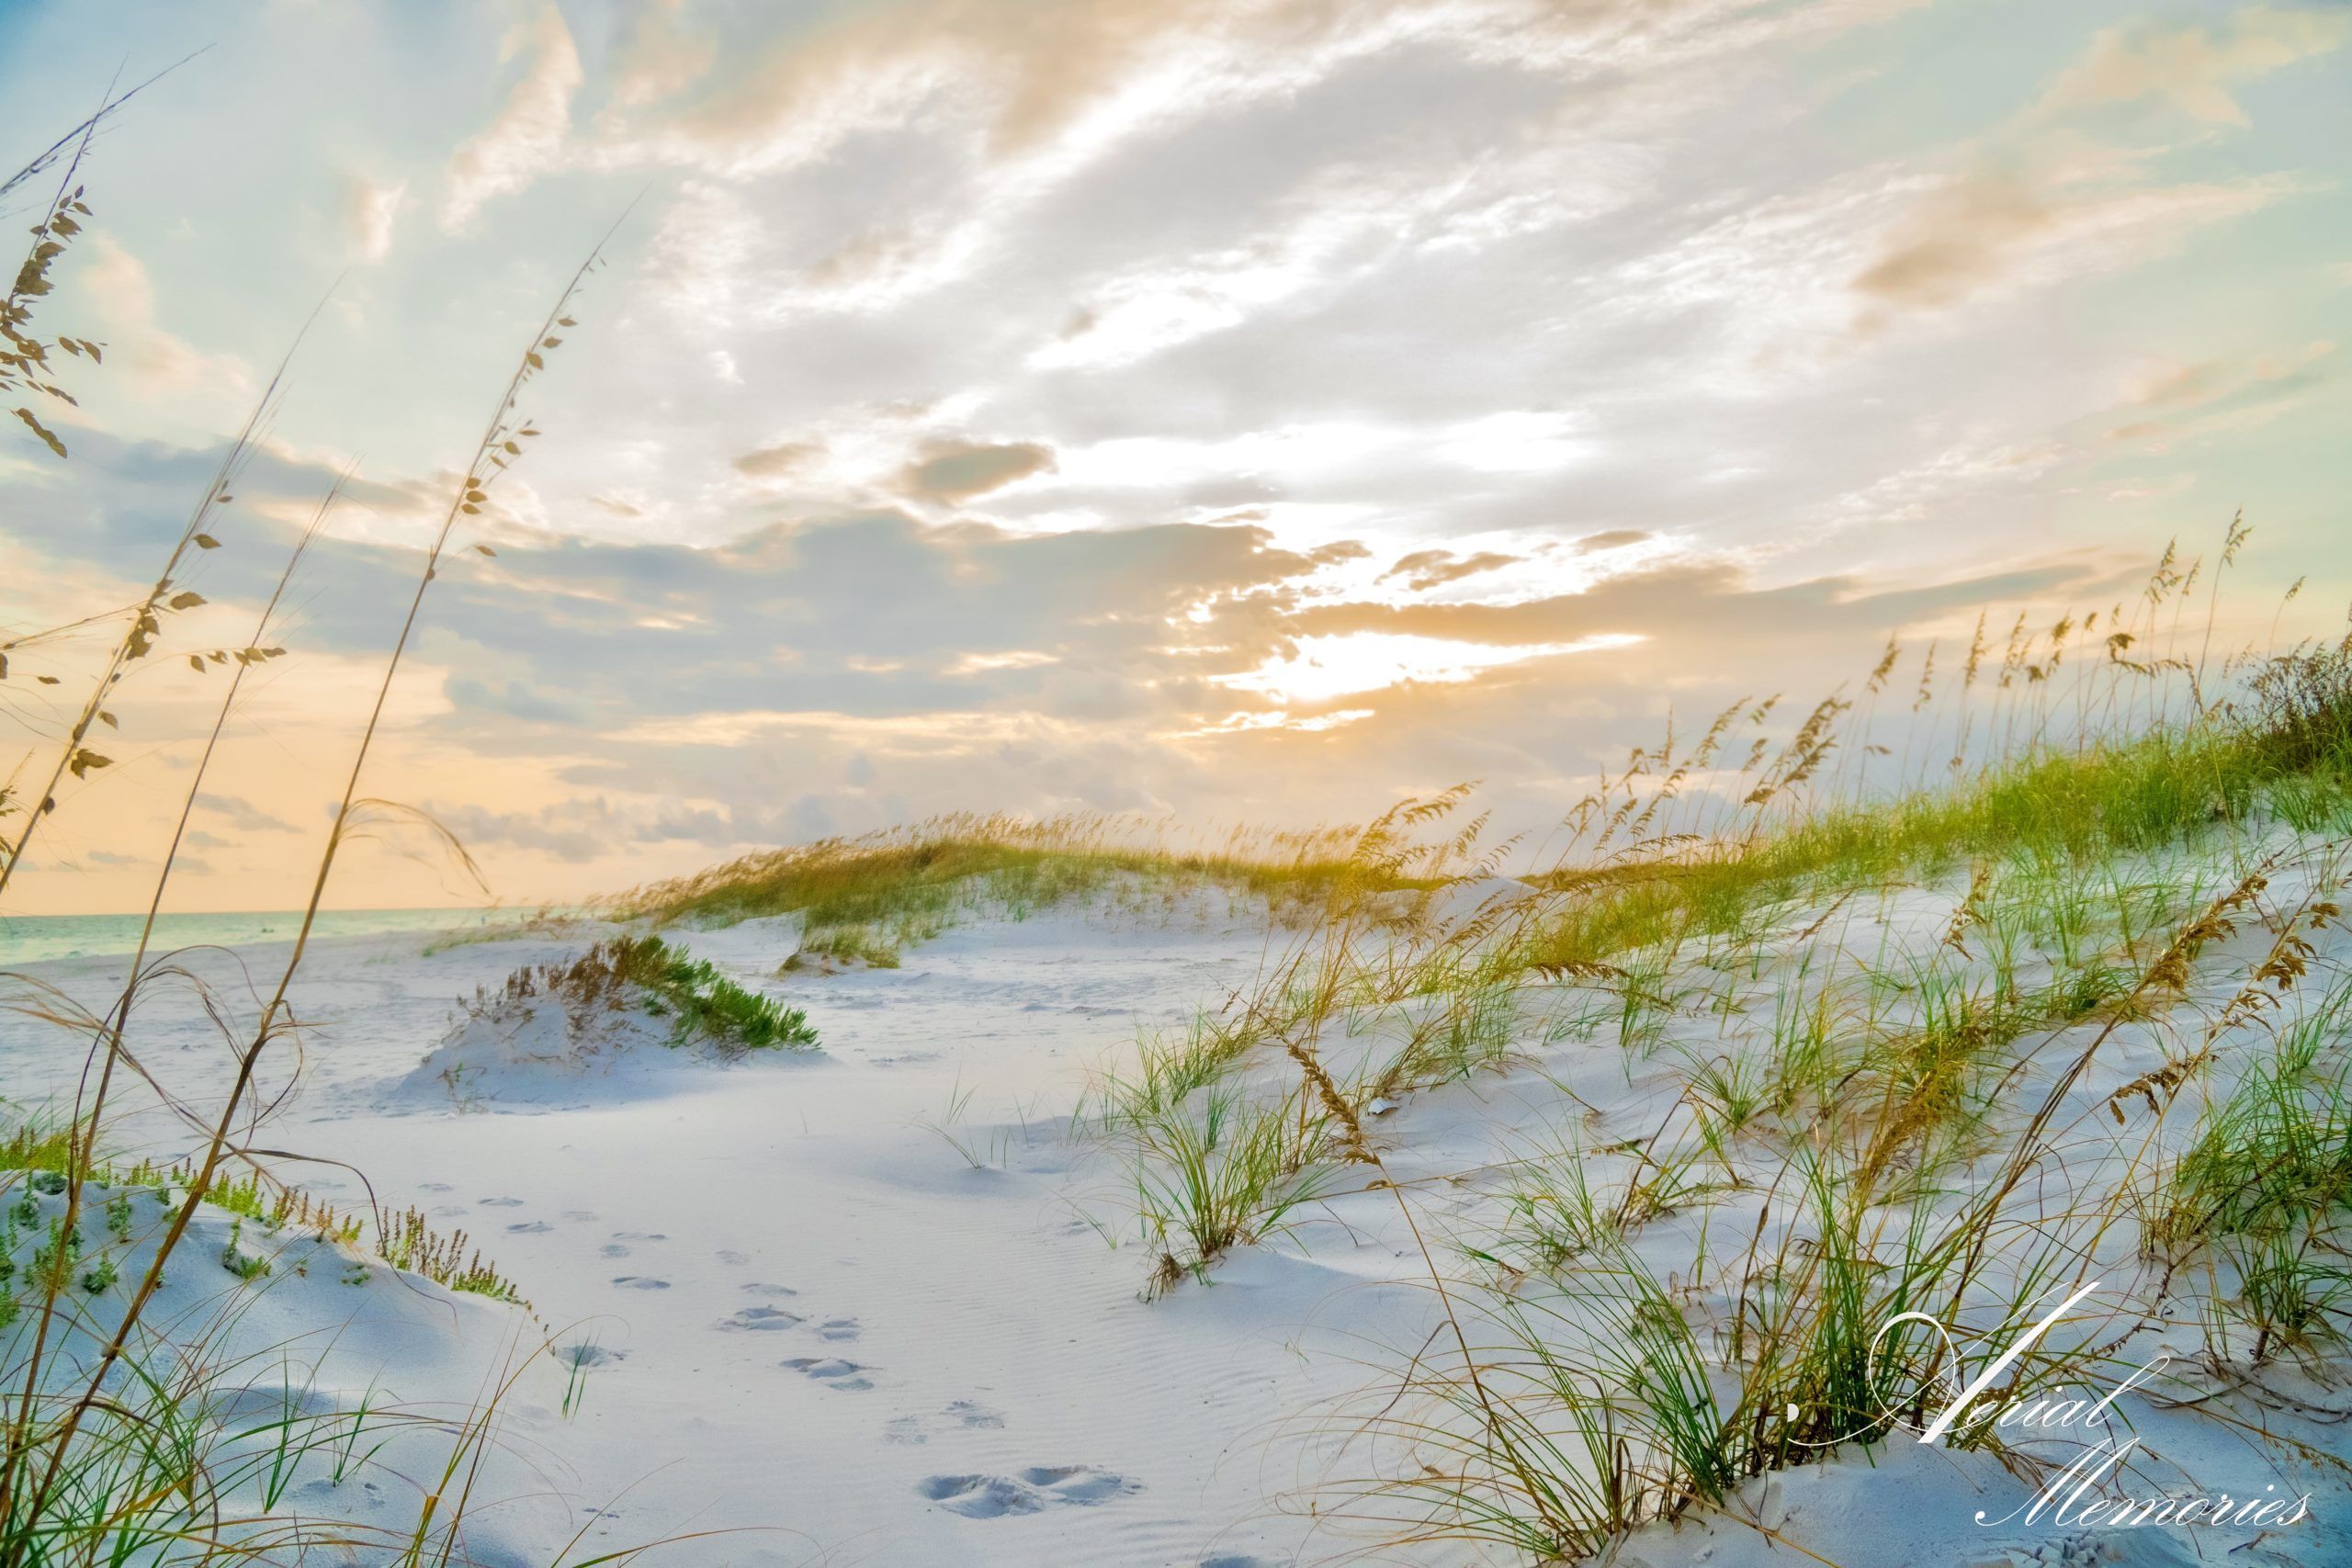 Today's Photo of the Day was submitted by Kyle Simmons. These are the dunes beyond Opal Beach around sunset, which makes for a beautiful scene!